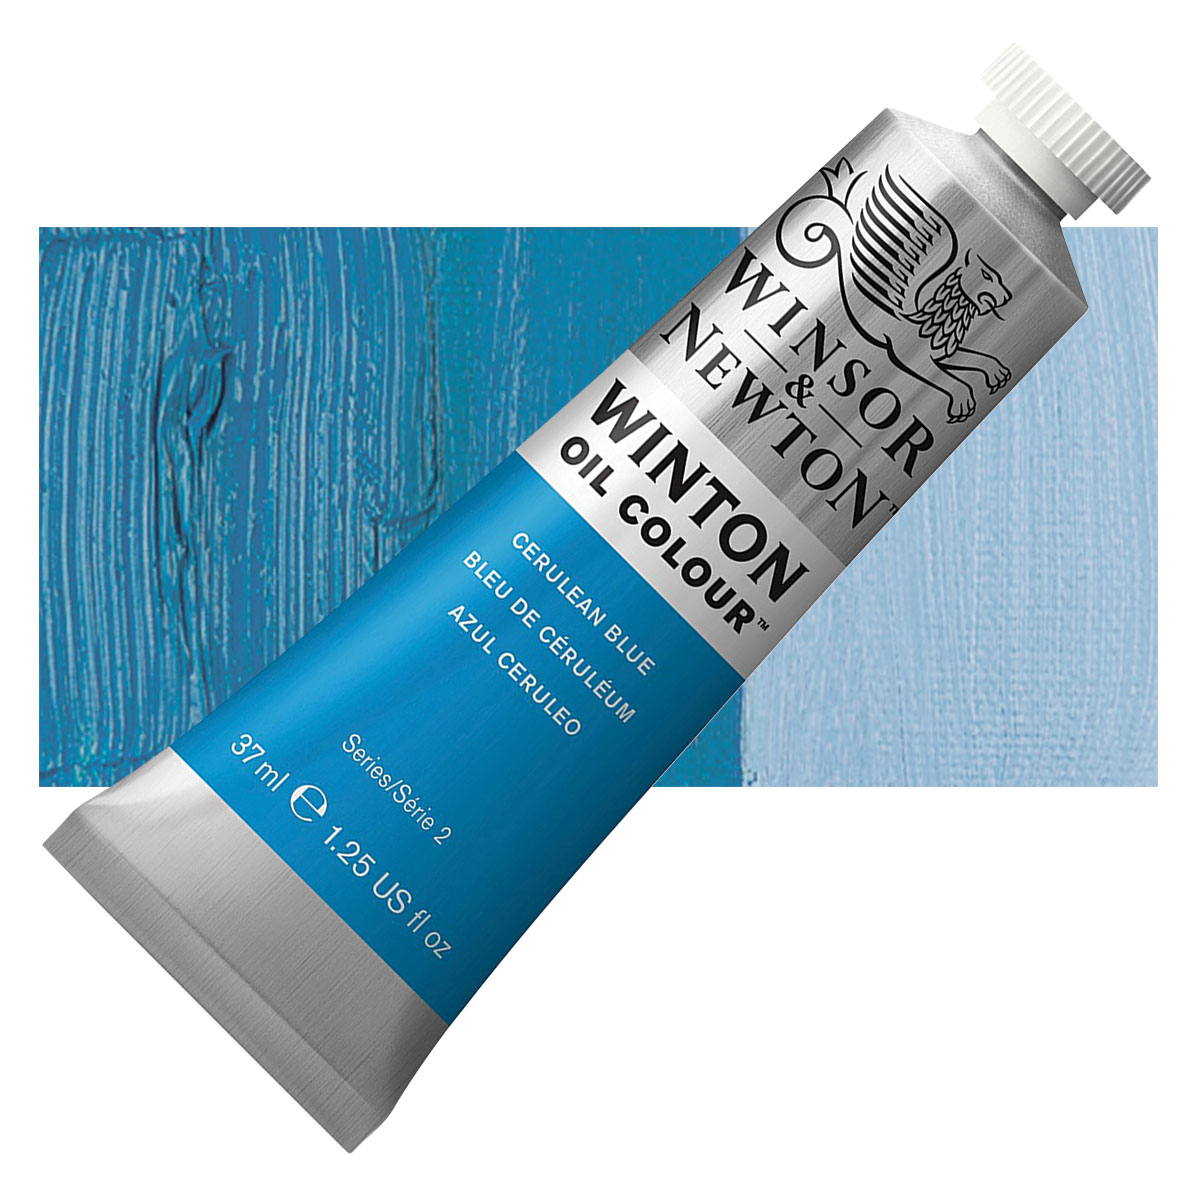 Winsor And Newton Oil Paint Colour Chart